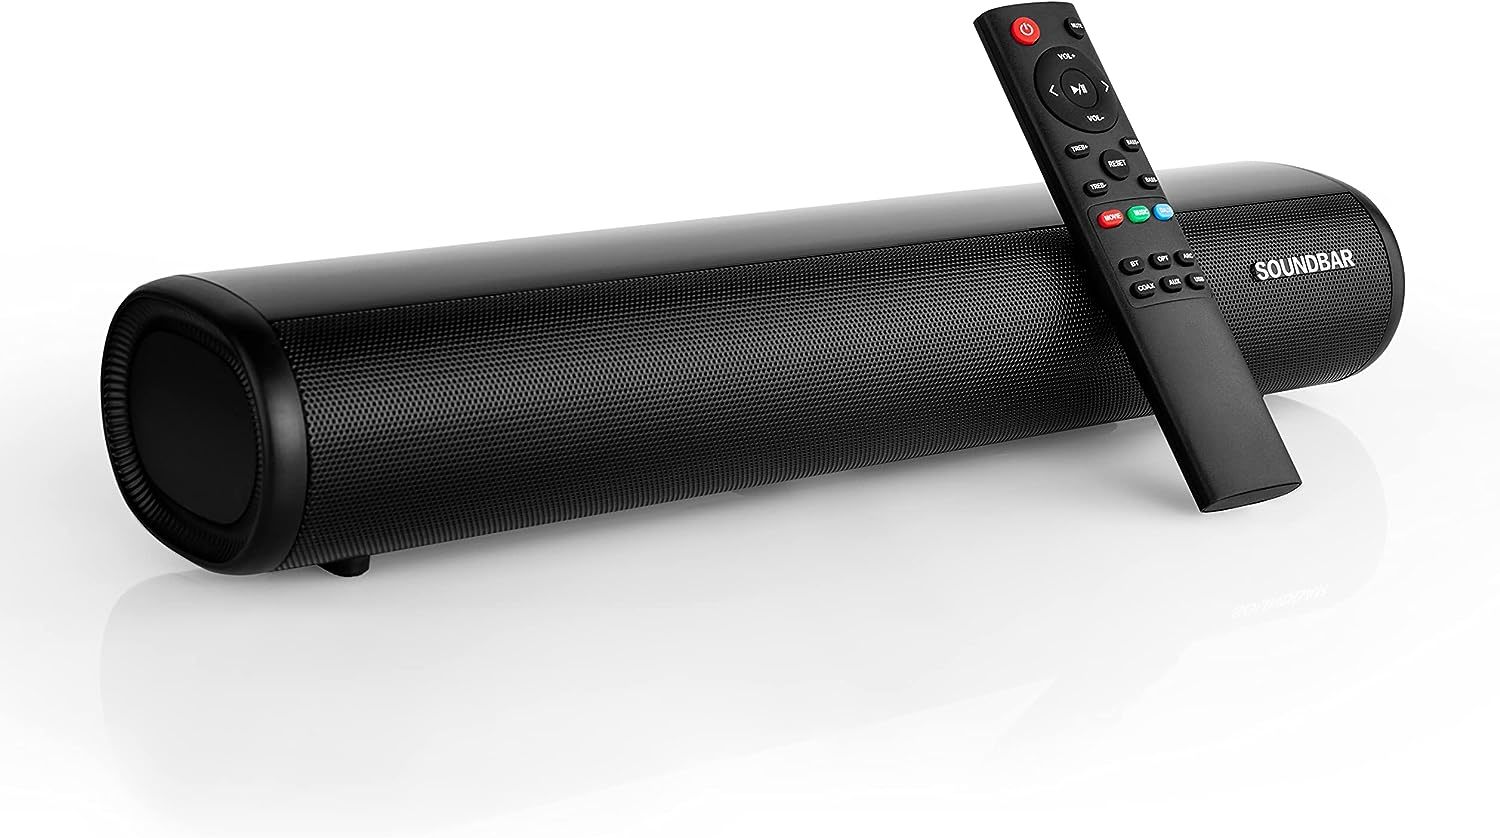 The Juneo Sound Bar Has Two Channels, Three Equalizer Modes, Five Wireless - $64.93